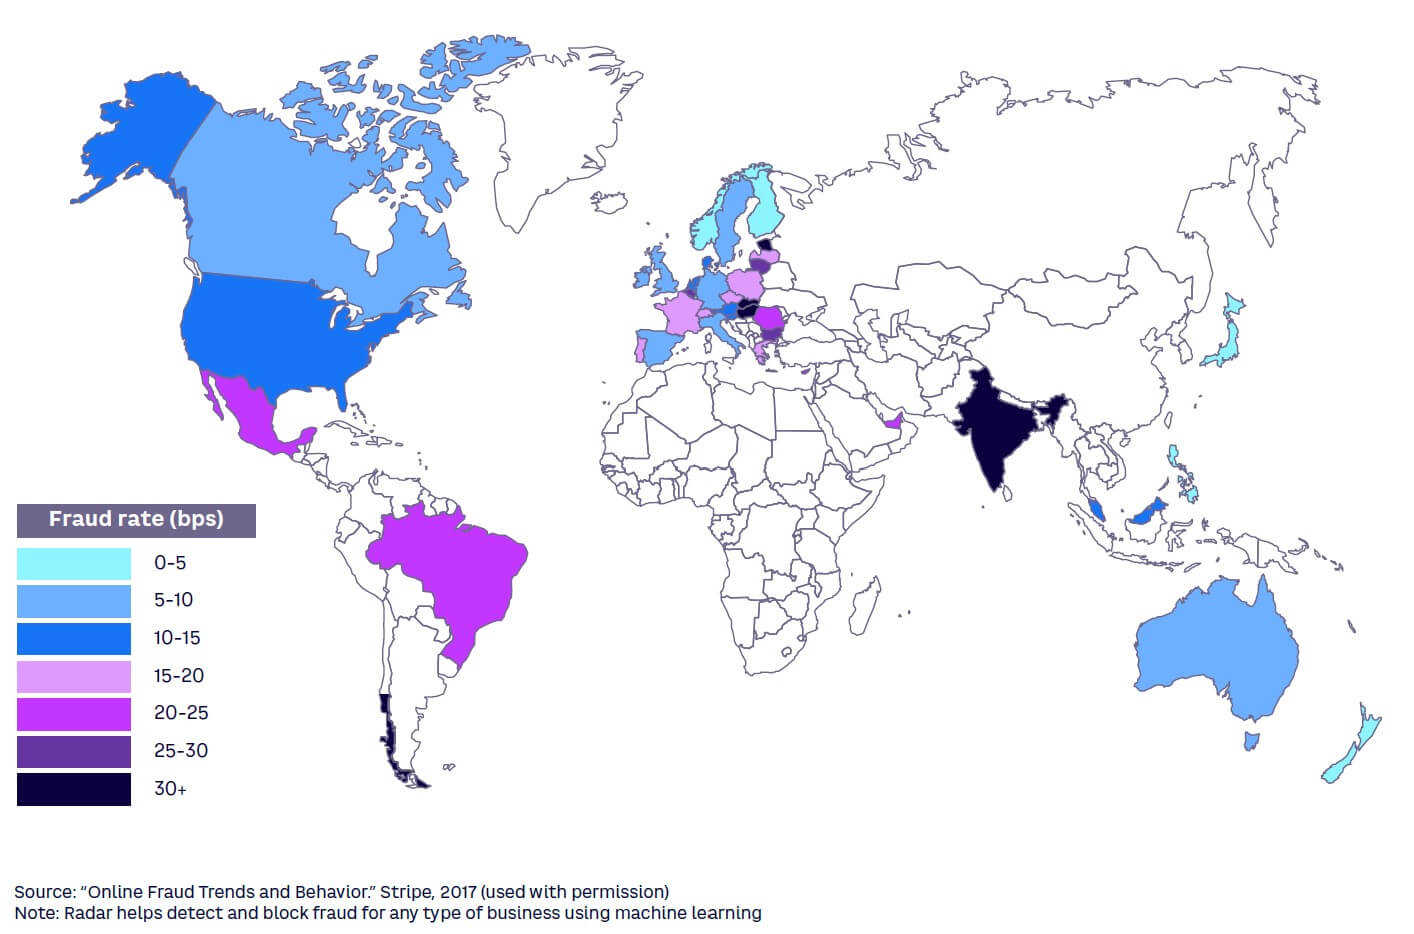 Figure 1. Country-level fraud rates